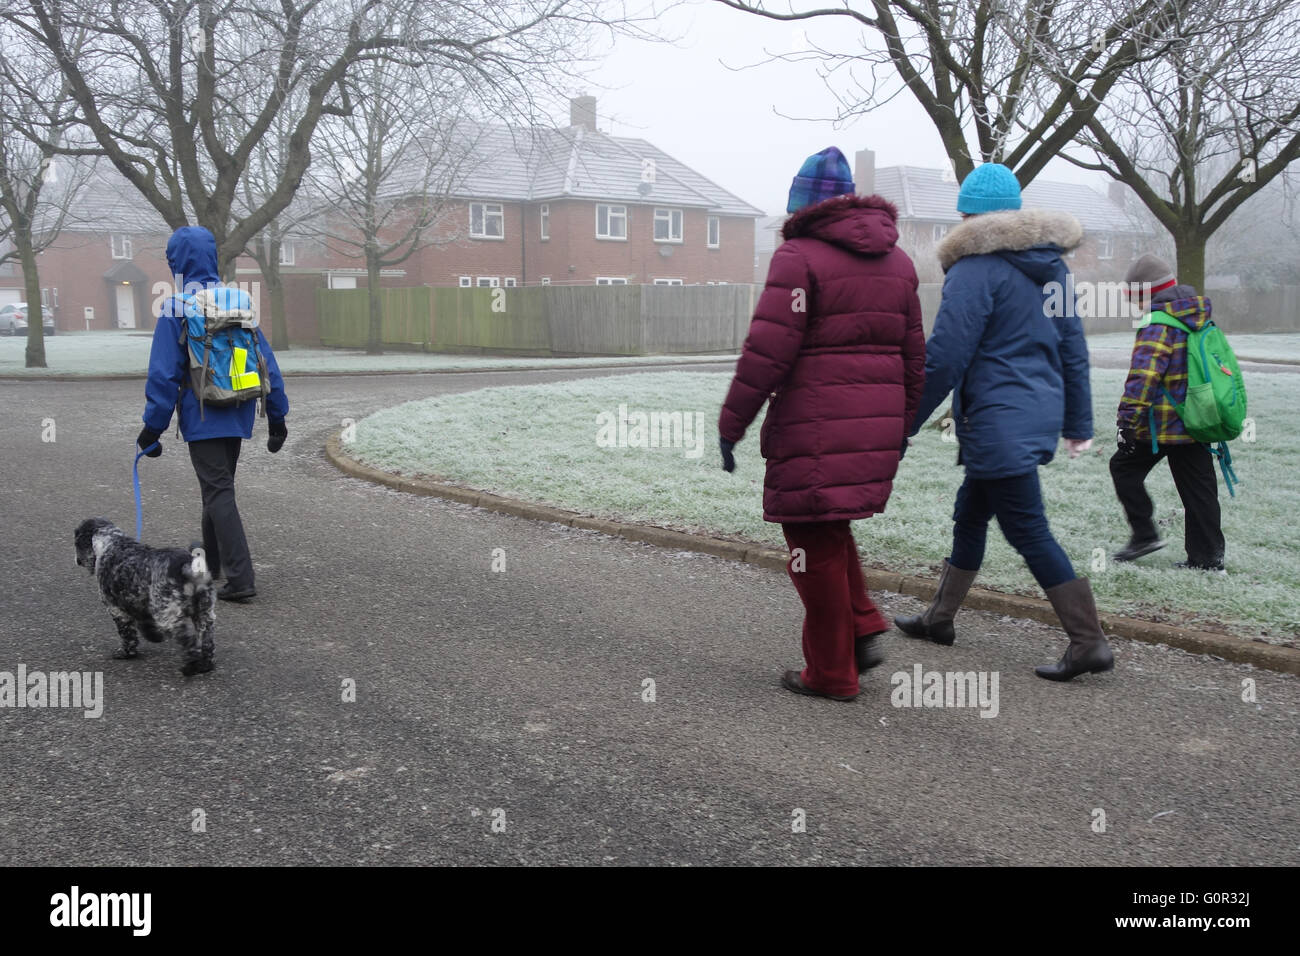 Children walking to school with Mother, Grandmother and dog Stock Photo